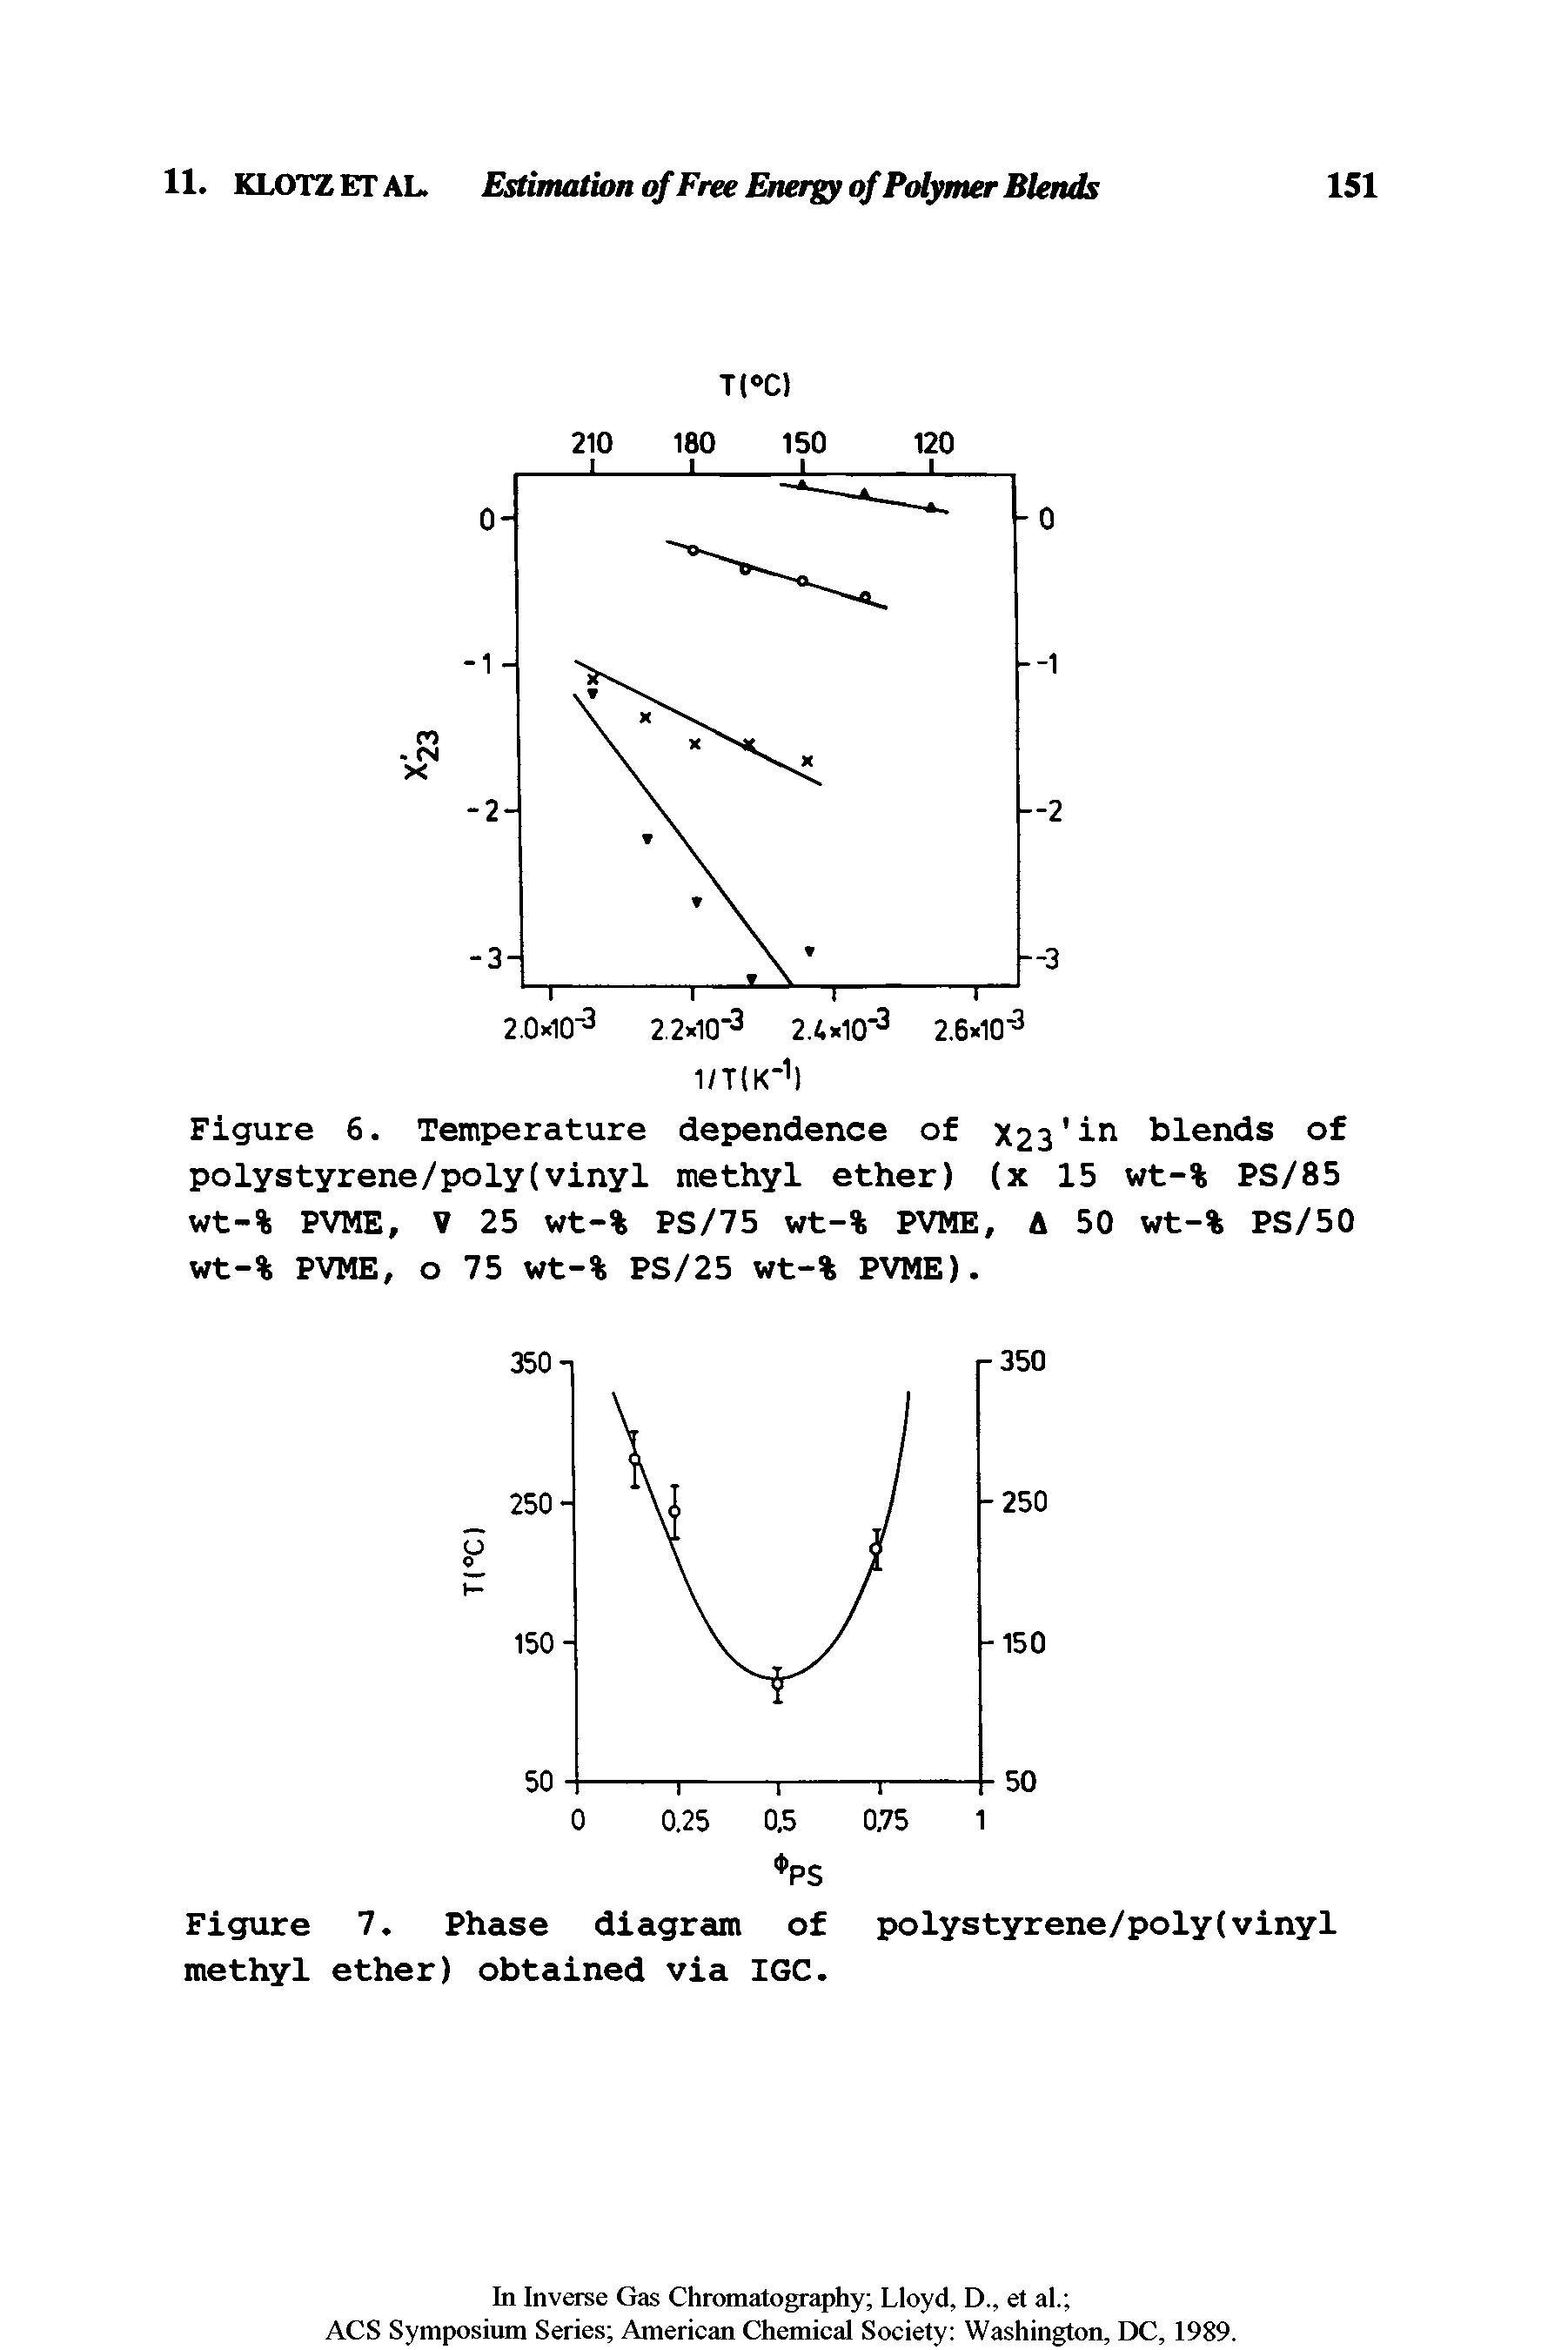 Figure 6. Temperature dependence of X23 in blends of polystyrene/poly(vinyl methyl ether) (x 15 wt-% PS/85 wt-% PVME, V 25 wt-% PS/75 wt-% PVME, A 50 wt-% PS/50 wt-% PVME, o 75 wt-% PS/25 wt-% PVME).